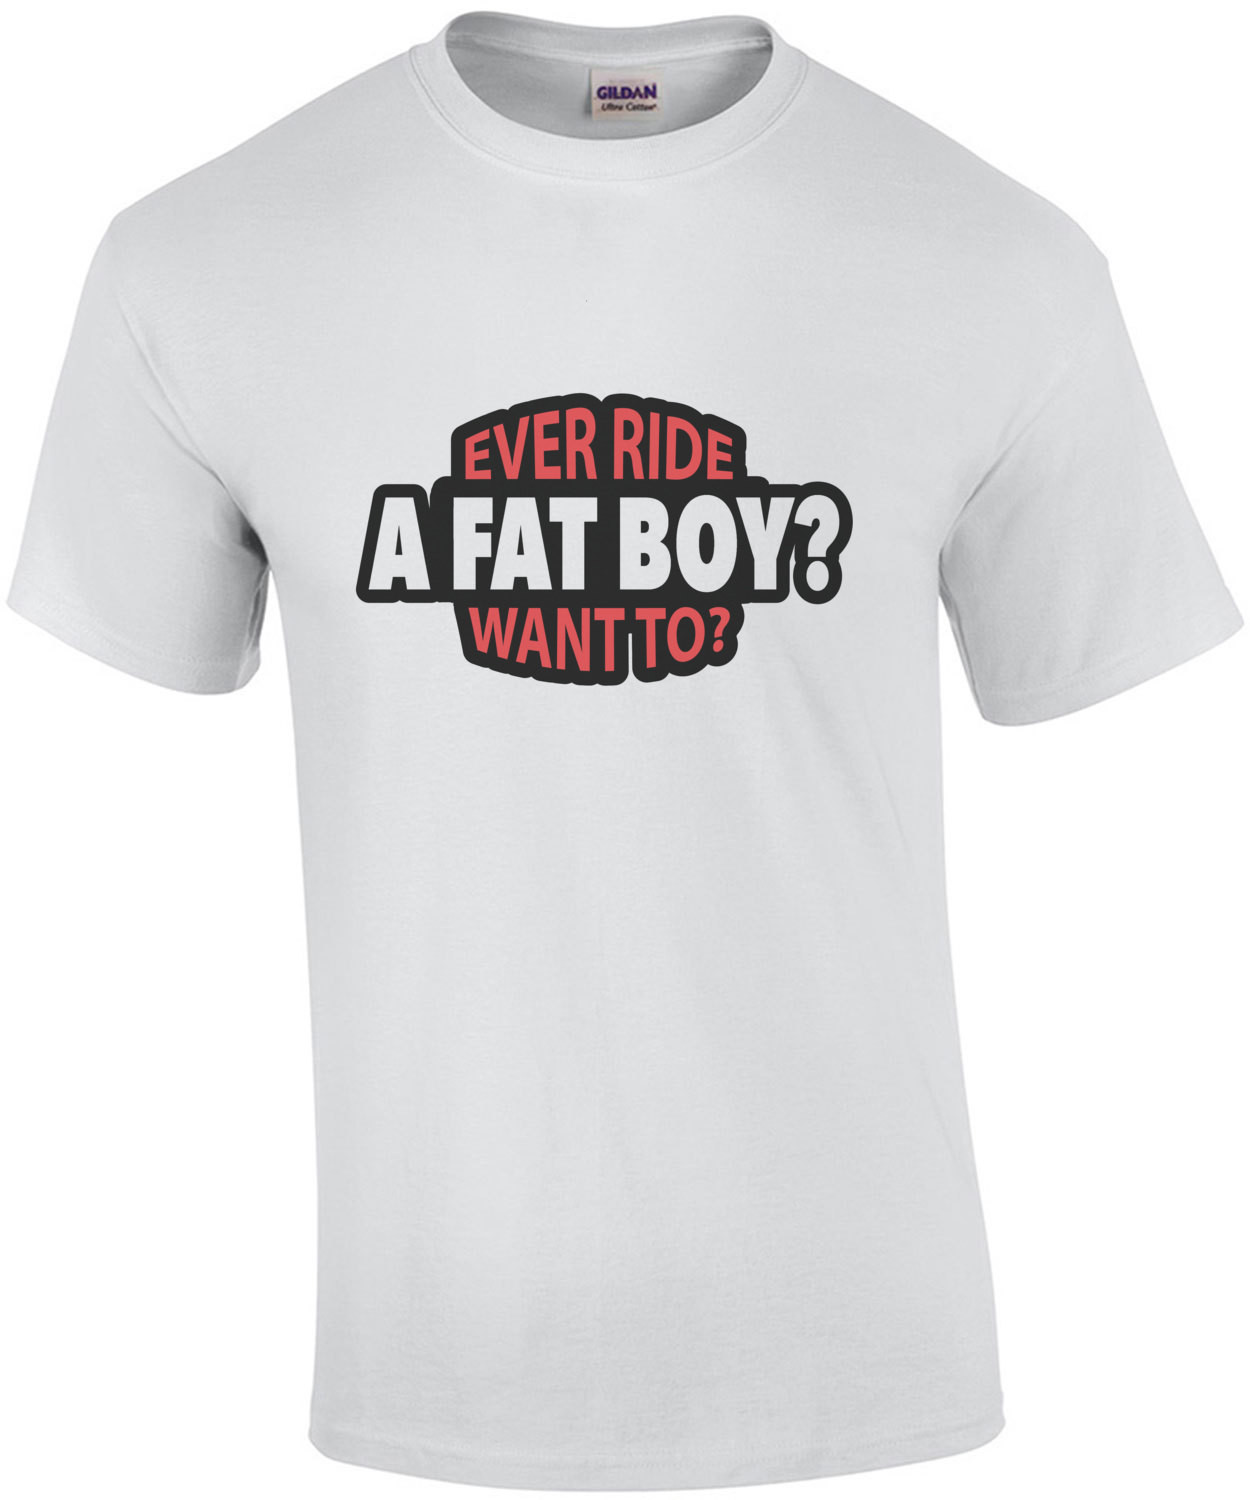 Ever ride a fatboy? want to? Biker T-Shirt